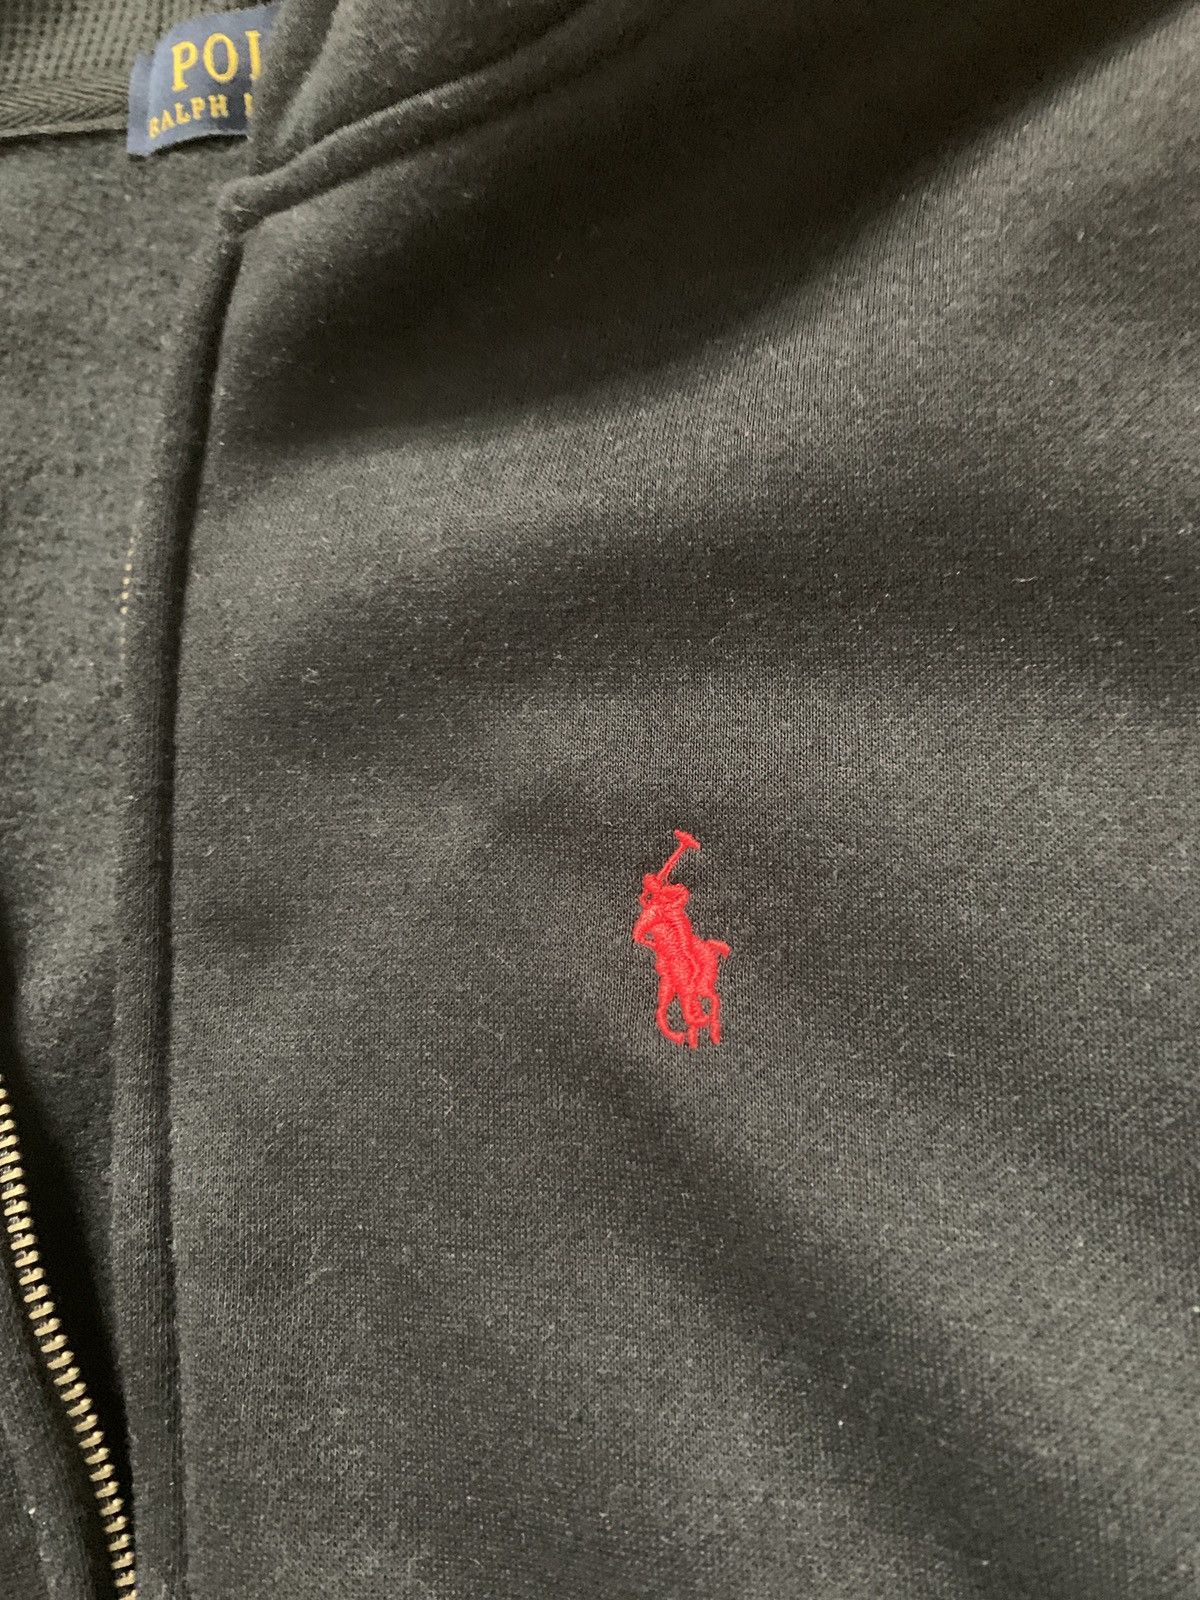 Polo Ralph Lauren Polo Zip Up Hoodie Size US M / EU 48-50 / 2 - 3 Preview